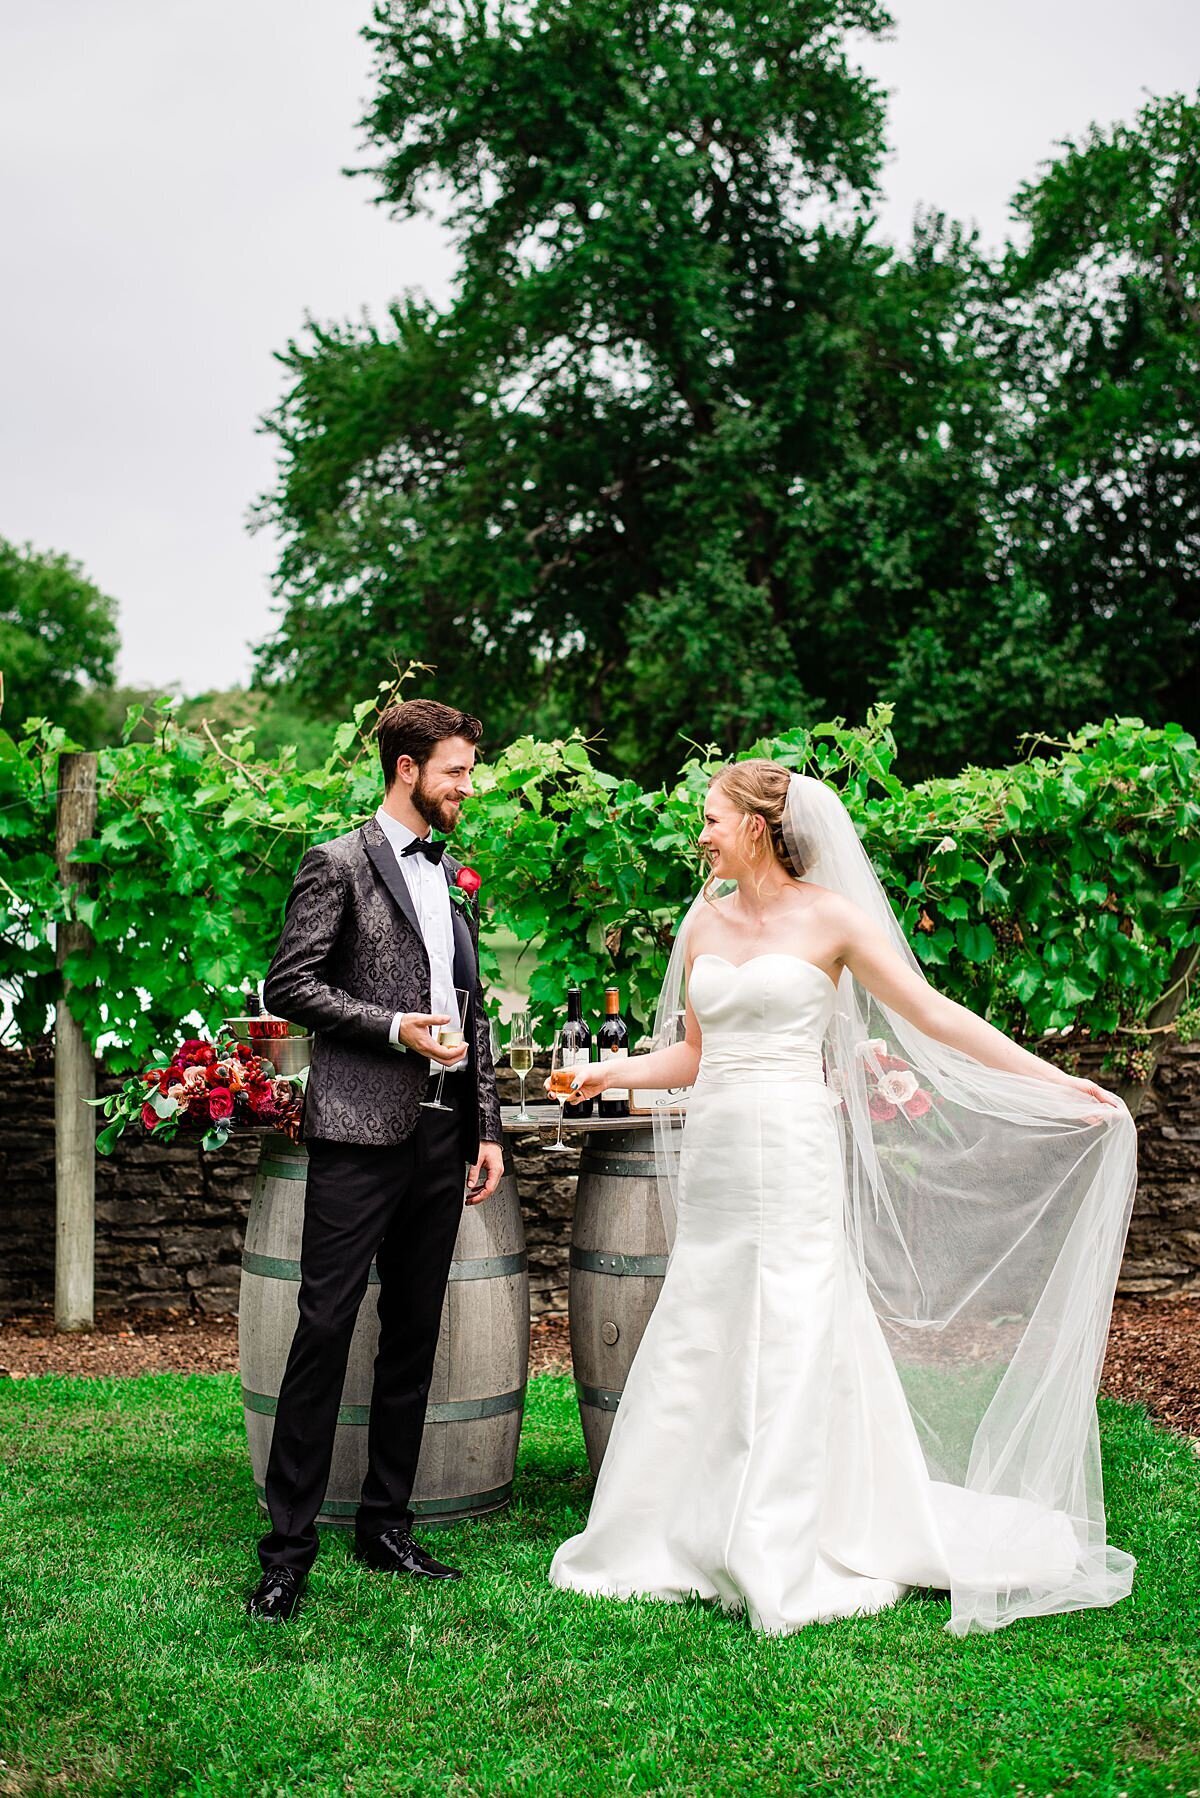 The bride, dressed in a silk strapless wedding dress with a lace bodice, sweetheart neckline and long veil clinks champagne flutes with the groom who is dressed in a black tuxedo with a silk tuxedo jacket embroidered with a paisley pattern and a red rose boutonniere. The bride and groom are drinking Arrington Vineyards Celebration Blanc in front of a barn wood wine bar set on top of two wine barrels decorated with a large bouquet of red roses, blush roses, red anthurium, red anemones, red and pink protea, blue thistle, hypericum berries, dianthus and assorted greenery at their wedding at Arrington Vineyards.